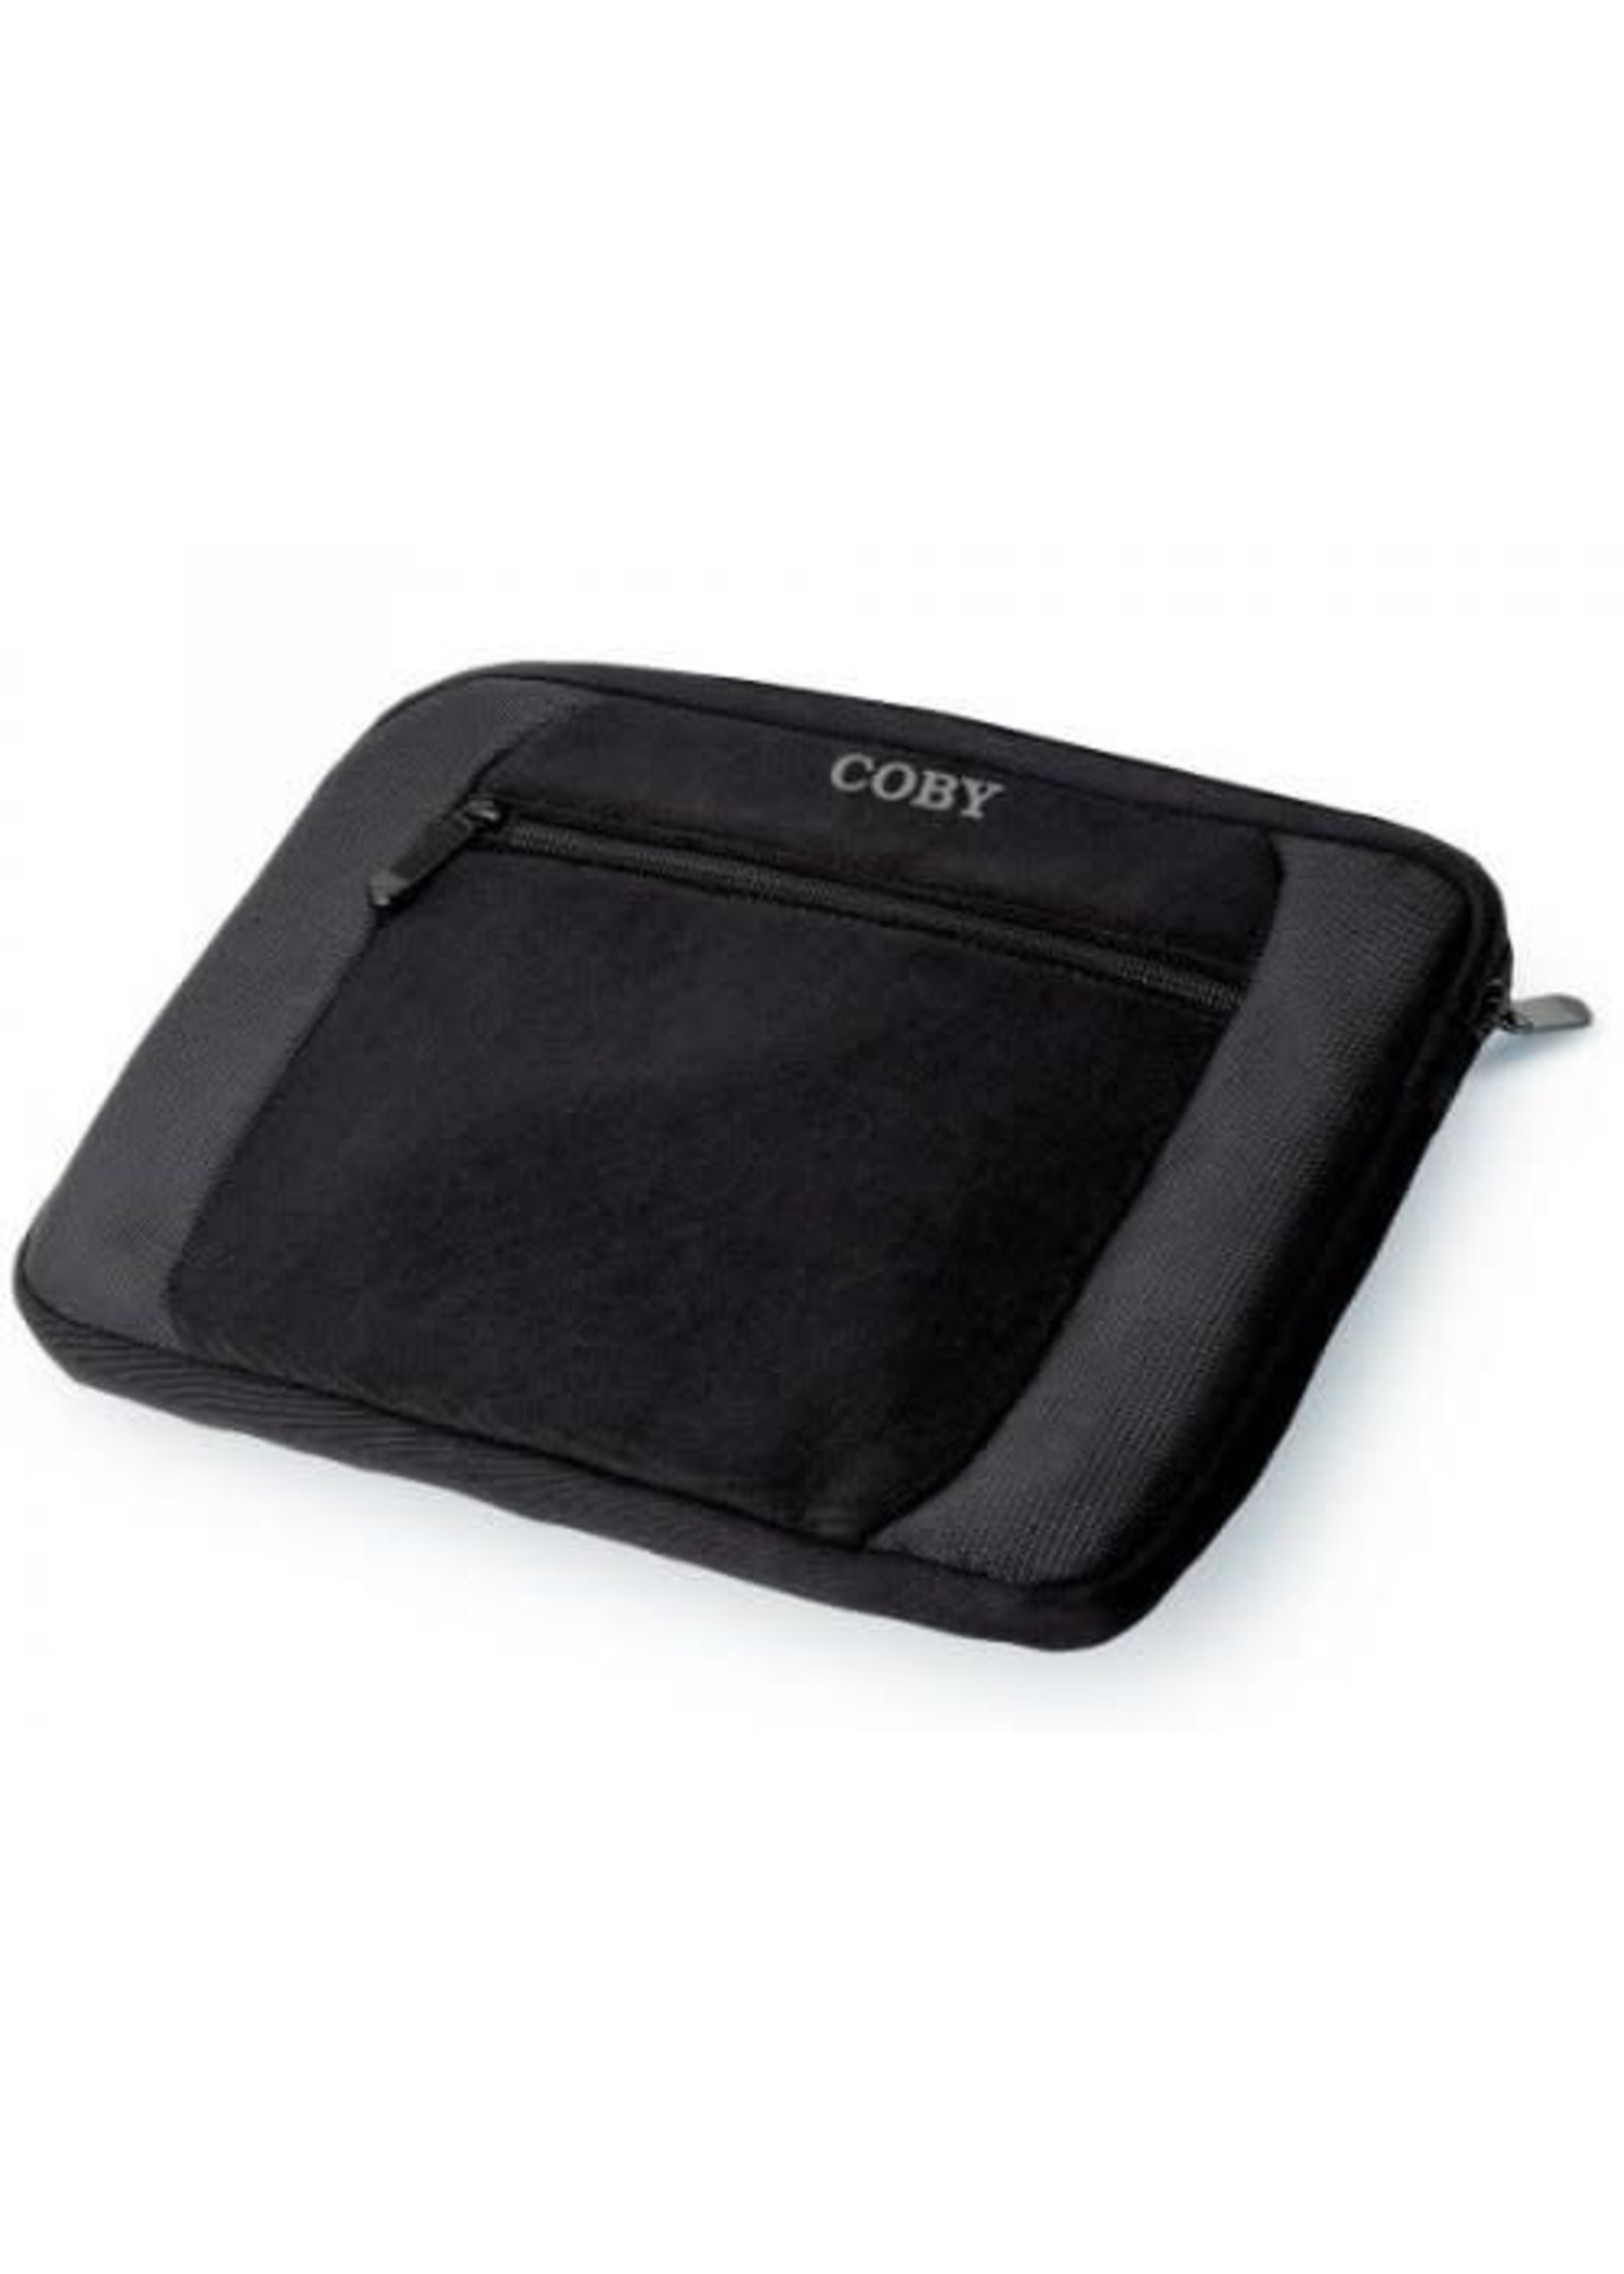 Coby Tablet Accesory Kit 8in